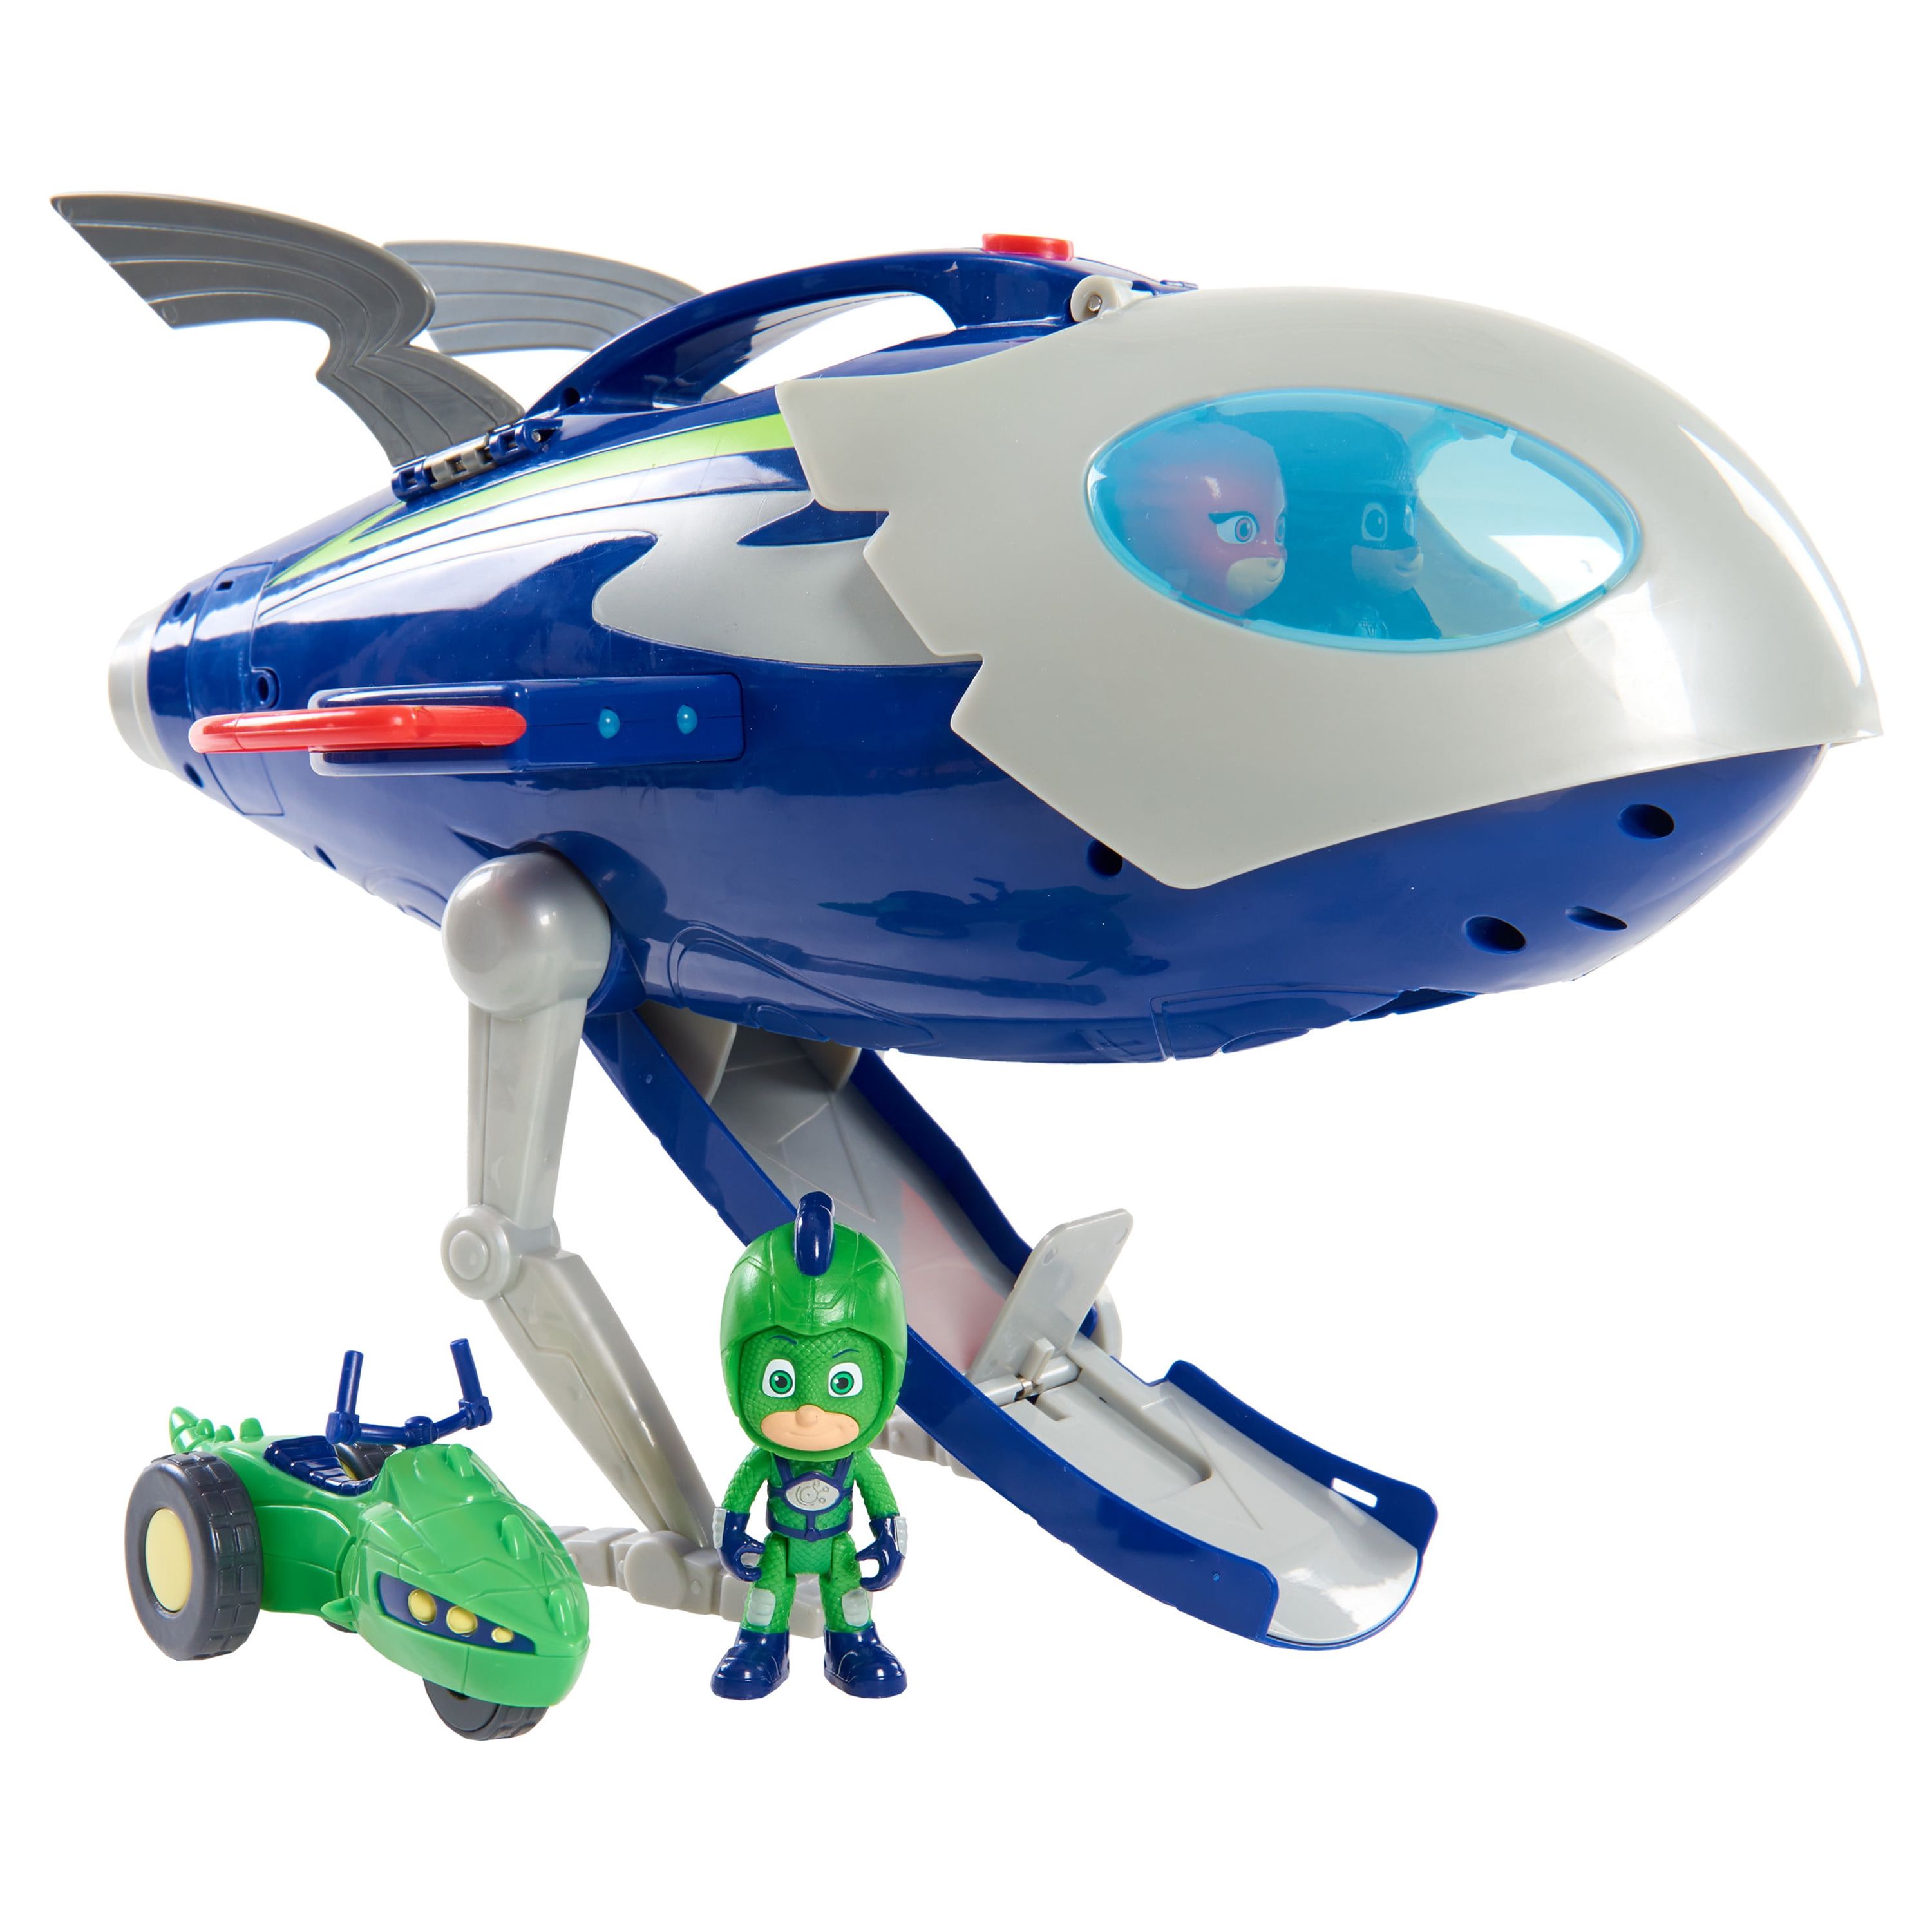 PJ Masks Super Moon Adventure HQ Rocketship Playset,  Kids Toys for Ages 3 Up, Gifts and Presents - image 1 of 3